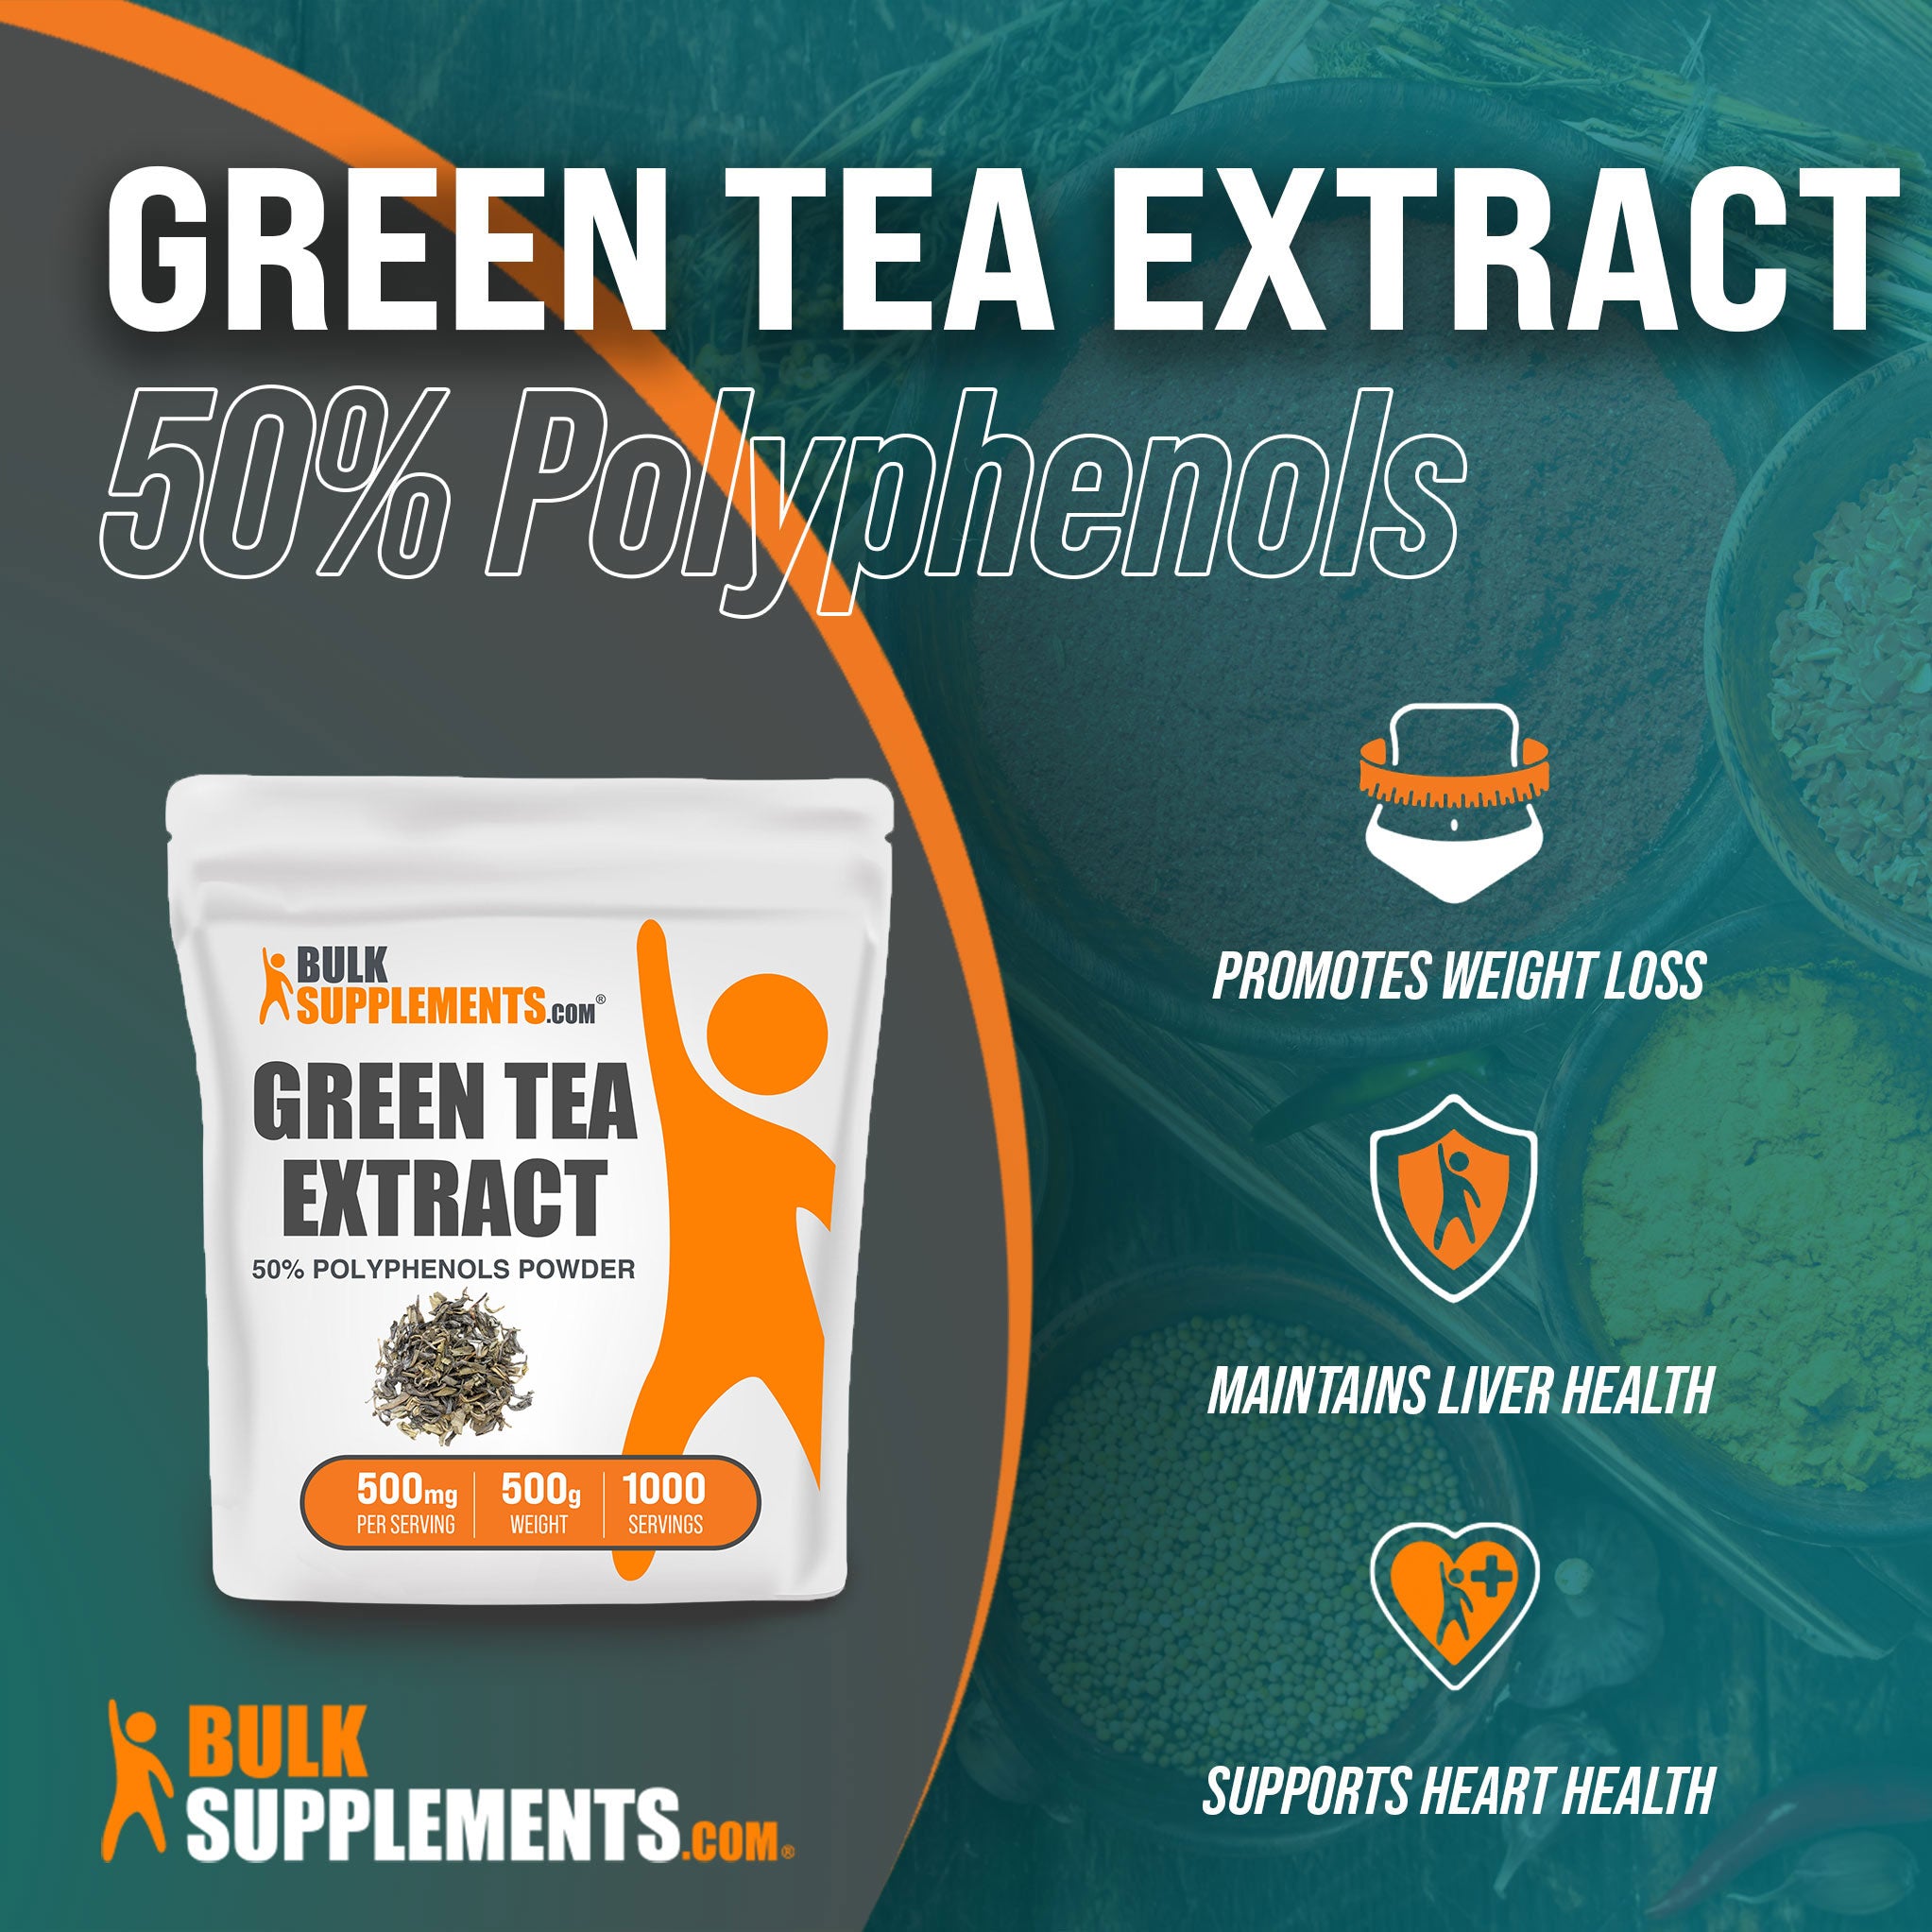 Benefits of Green Tea Extract 50% Polyphenols; promotes weight loss, maintains liver health, supports heart health